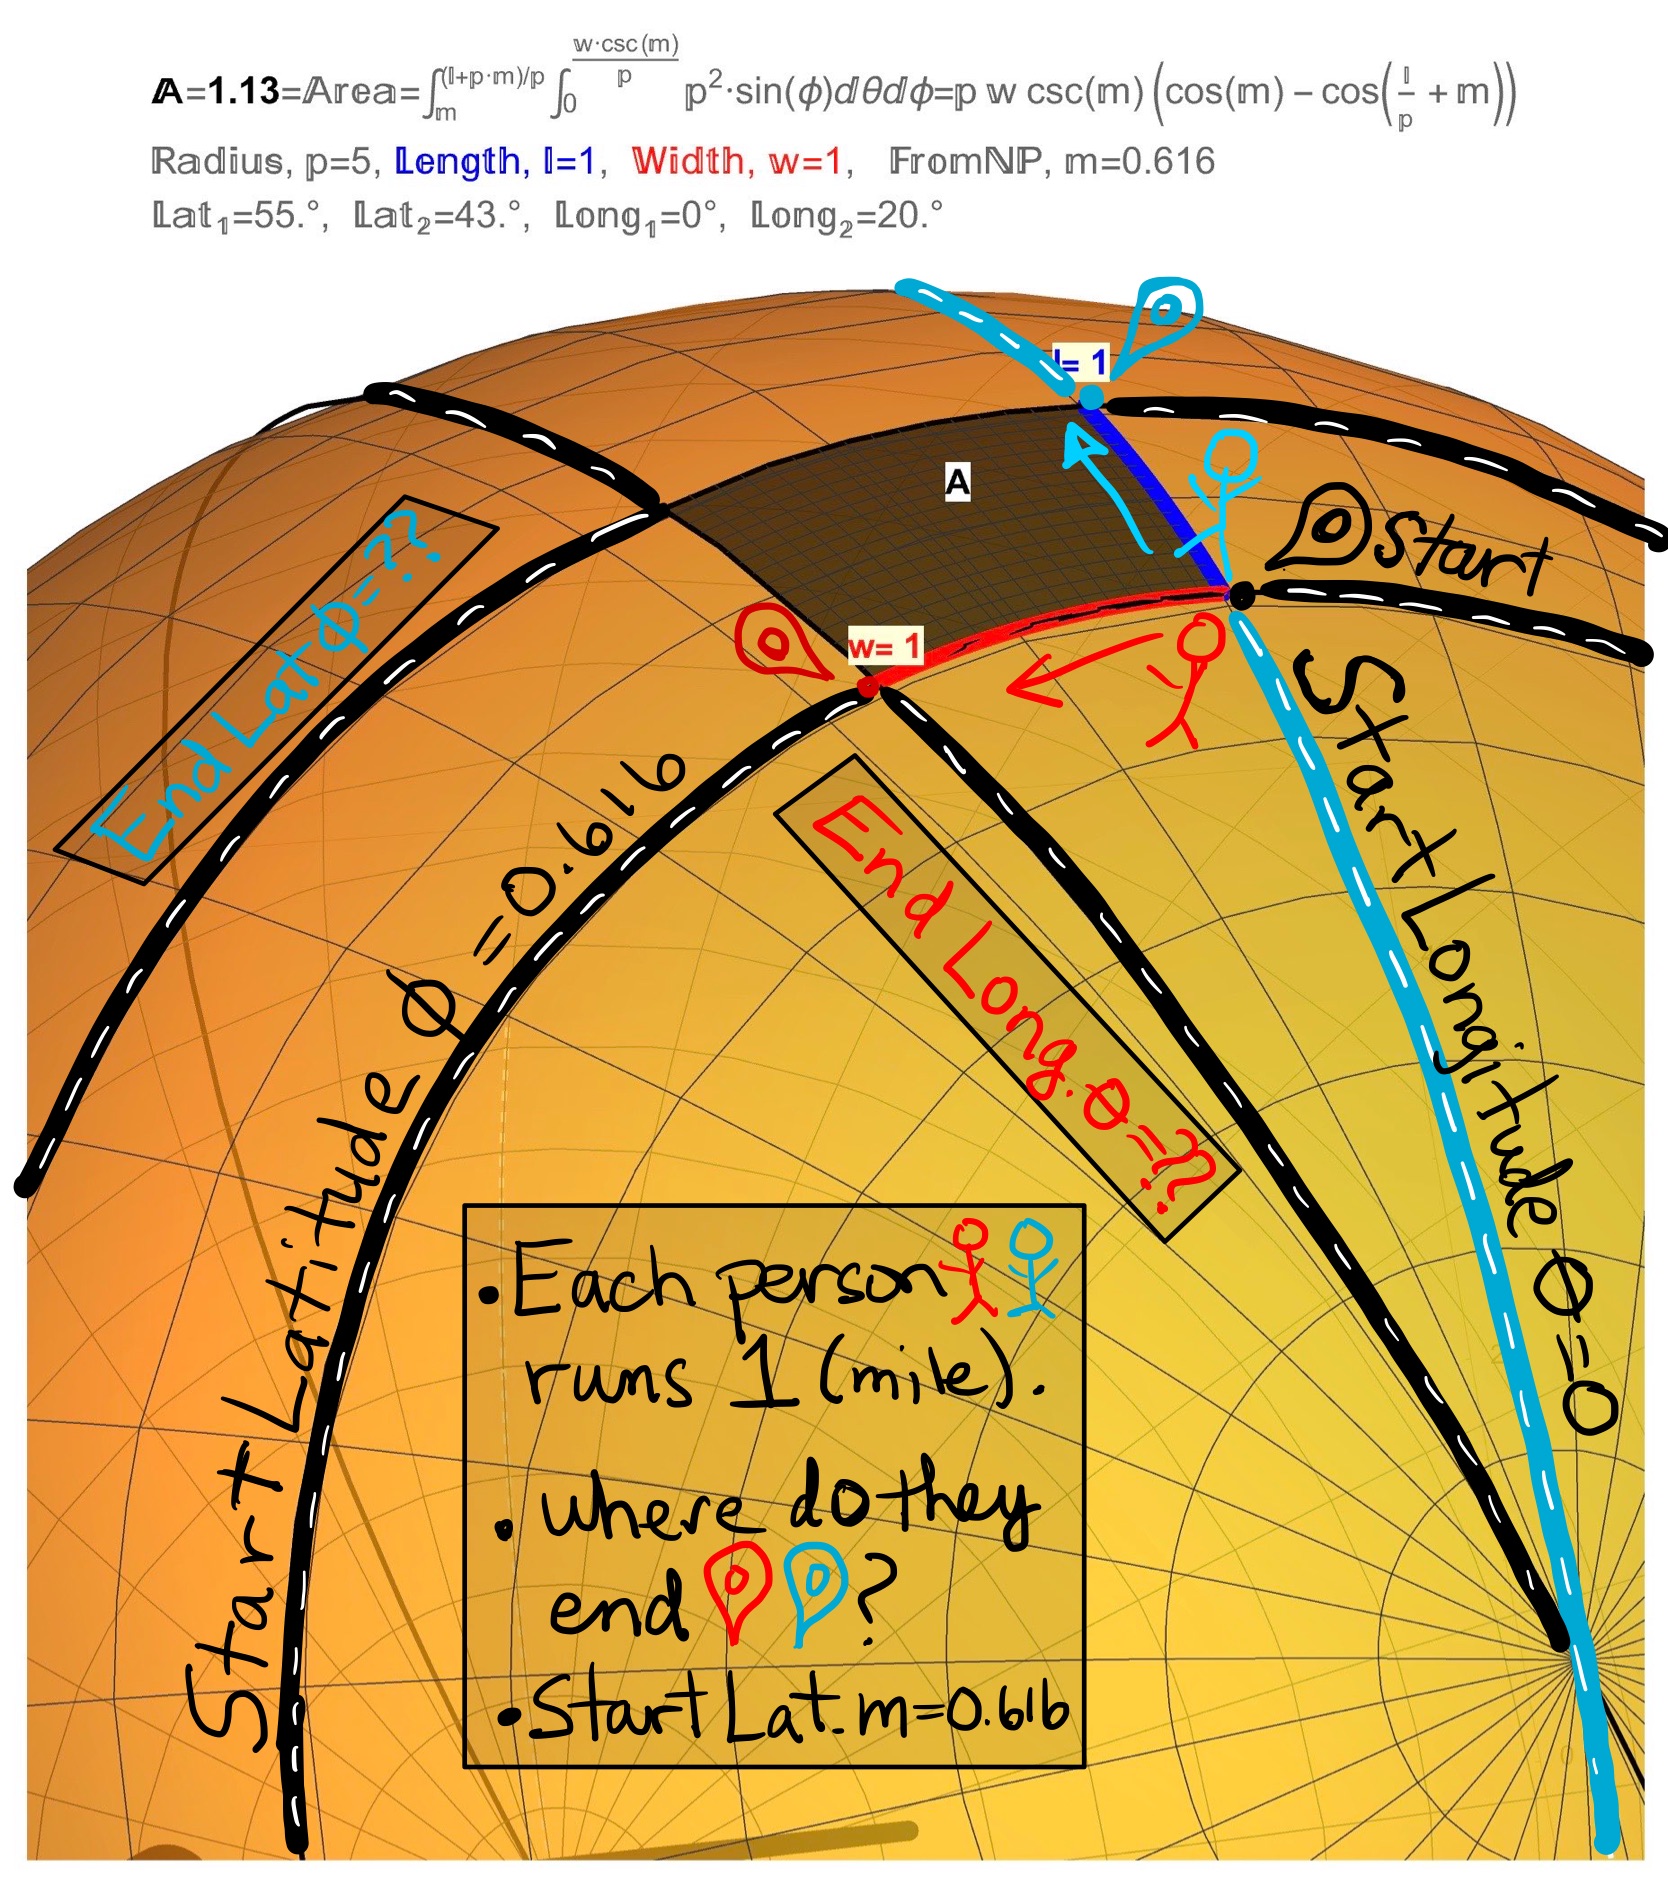 Question: If two runners (blue and red) both start at the location \((\theta,\phi)=(0^{R},0.616^{R})\) on a sphere of radius 5 (miles) and run for 1 (mile) (but in opposite directions; along a longitude and latitude, respectively), then what is the finishing location \((\theta,\phi)\) of each runner? The question applies equally to airplanes and flight paths.